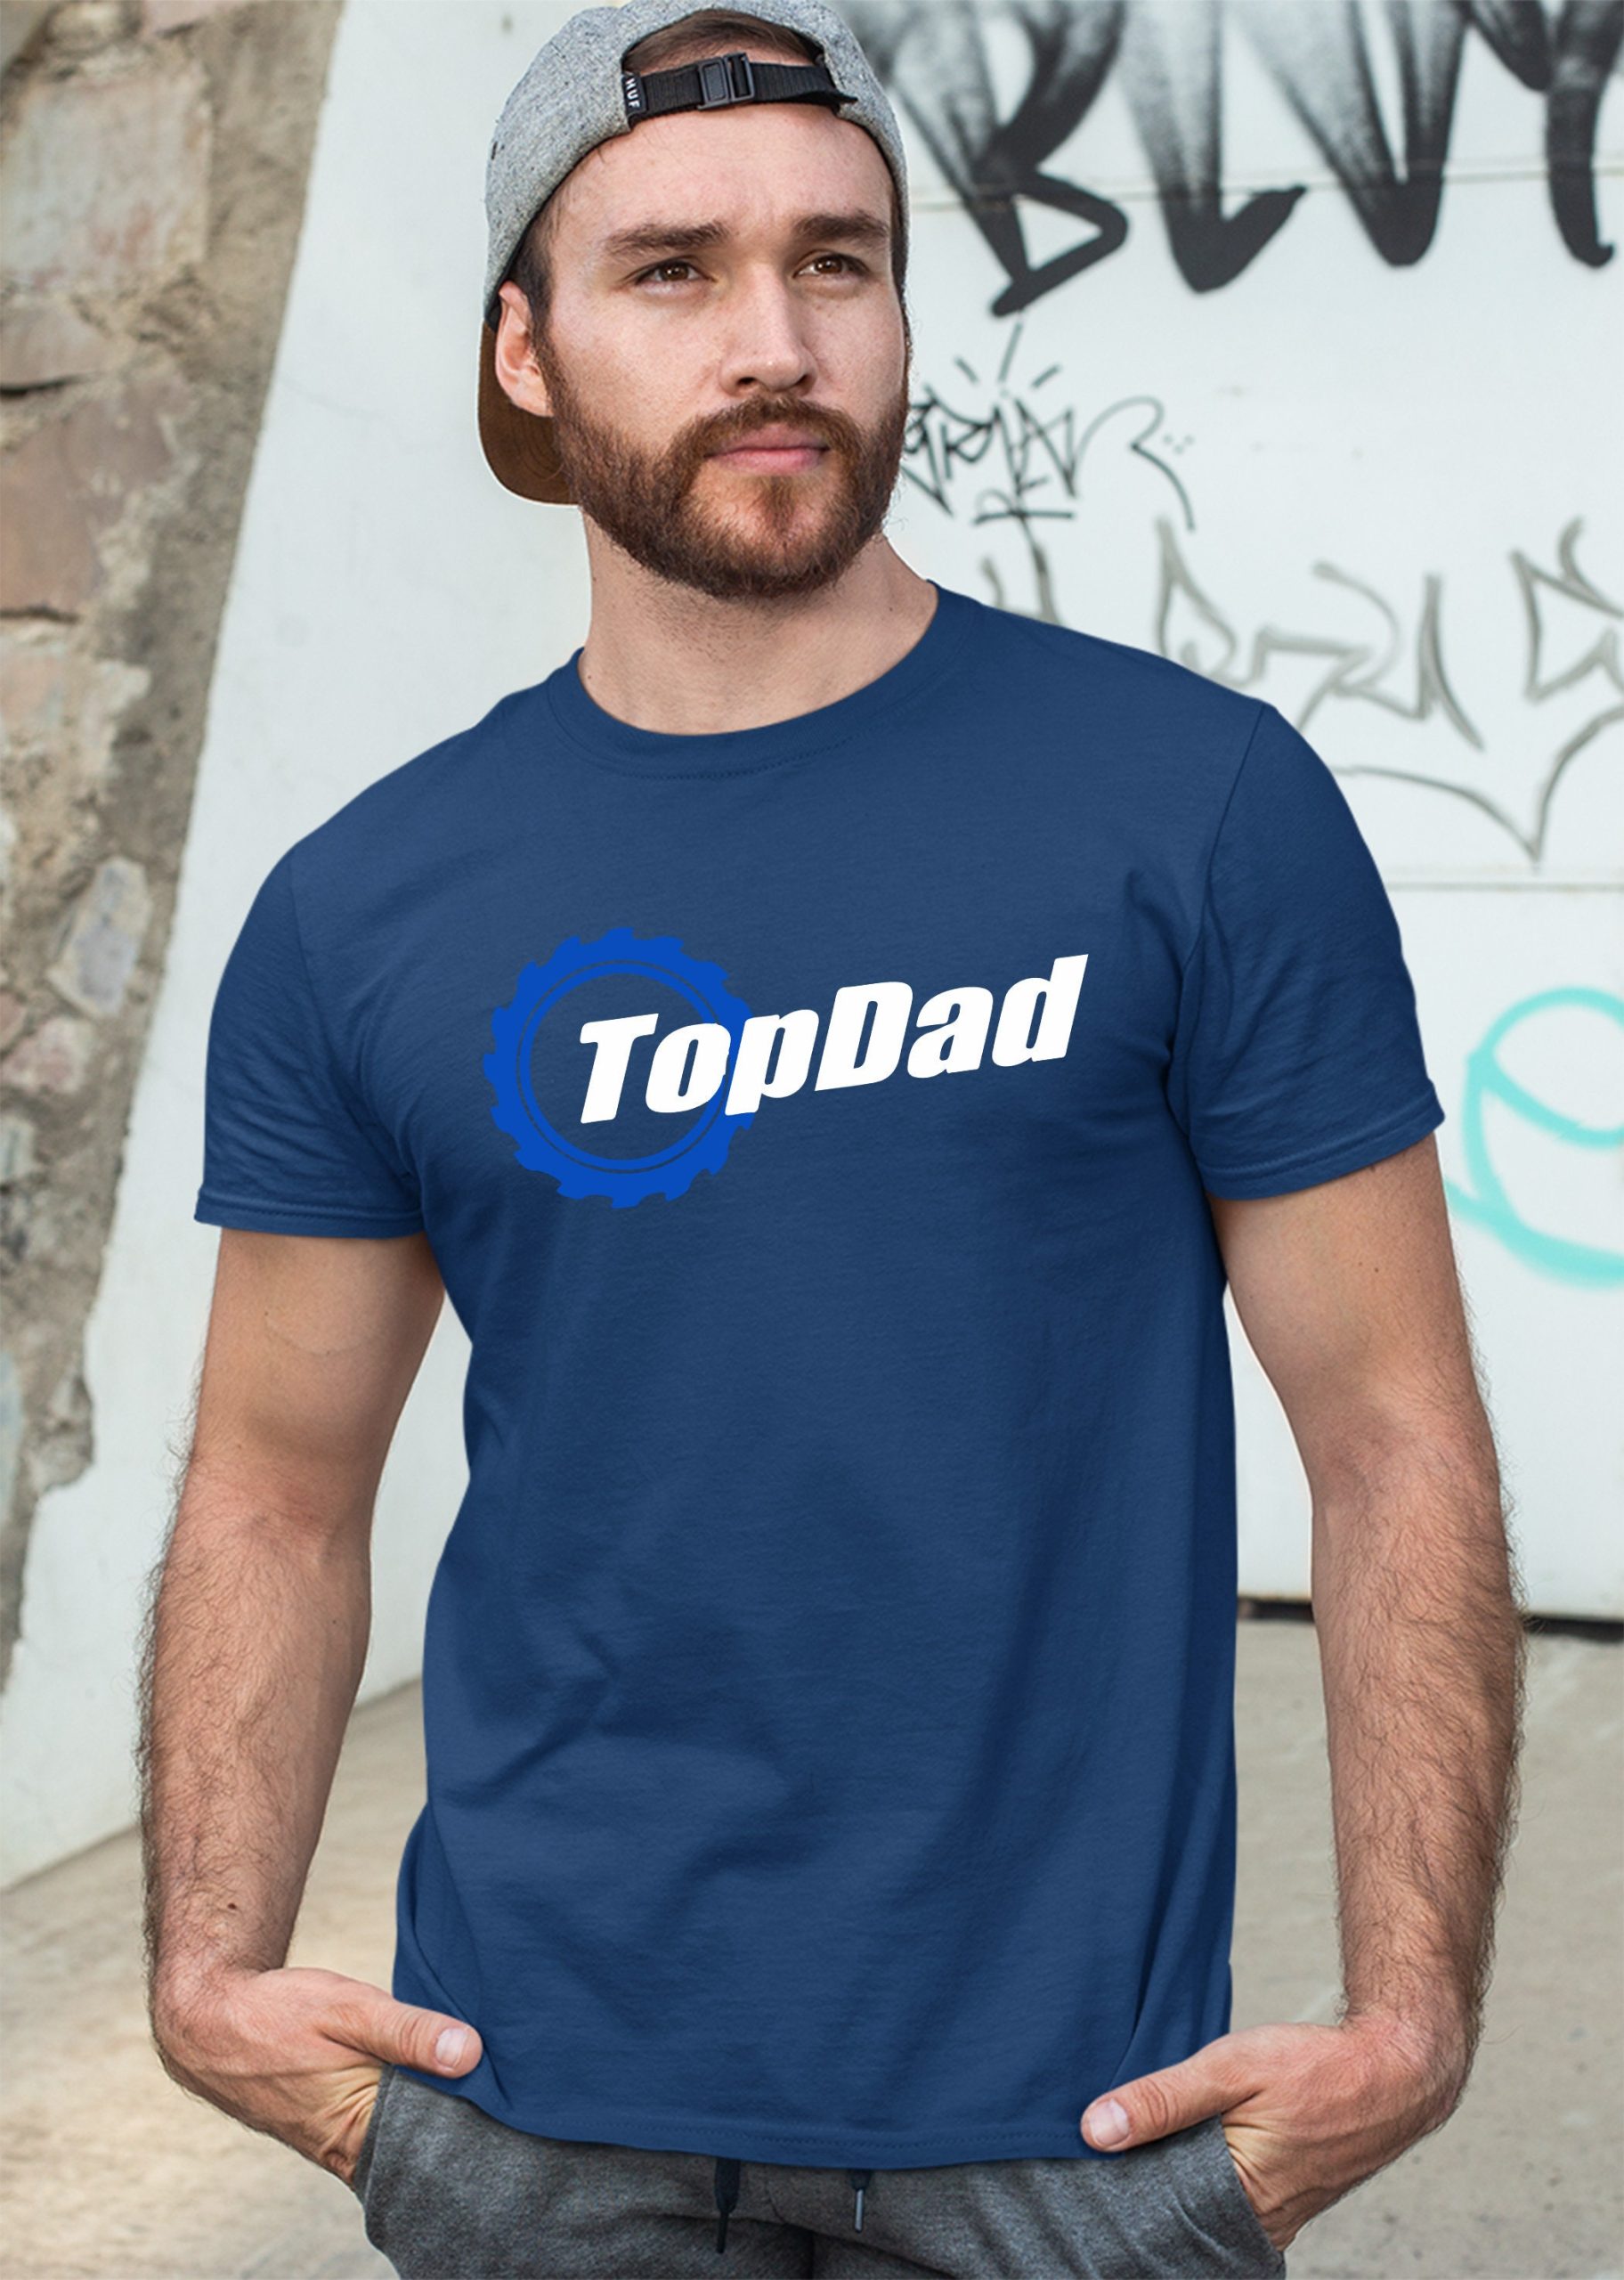 Top Dad Gear Car Fan Tv Show Father's Day Unisex T-Shirt